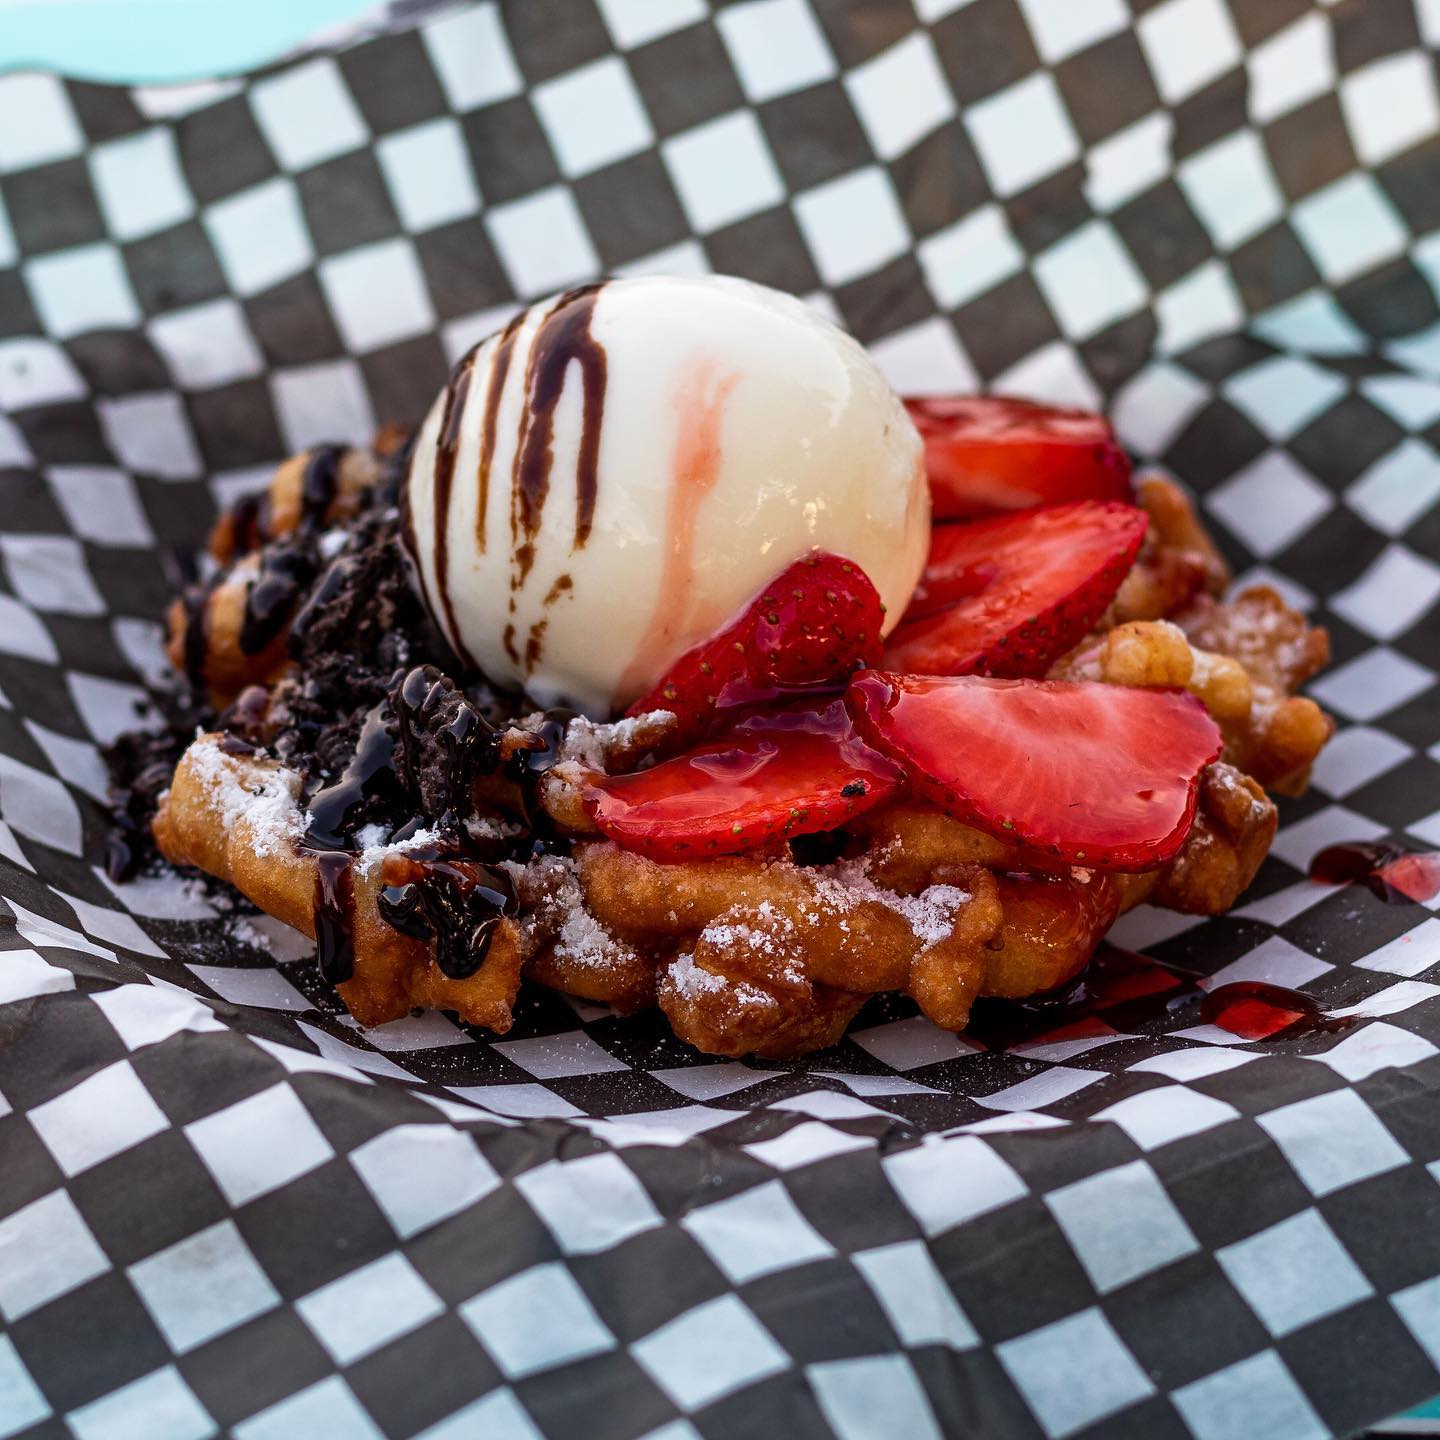 REVIEW: Funnel Cake Kiosk Returns with Mini Mocha Funnel Cake Available  During the 2023 EPCOT International Festival of the Arts - WDW News Today